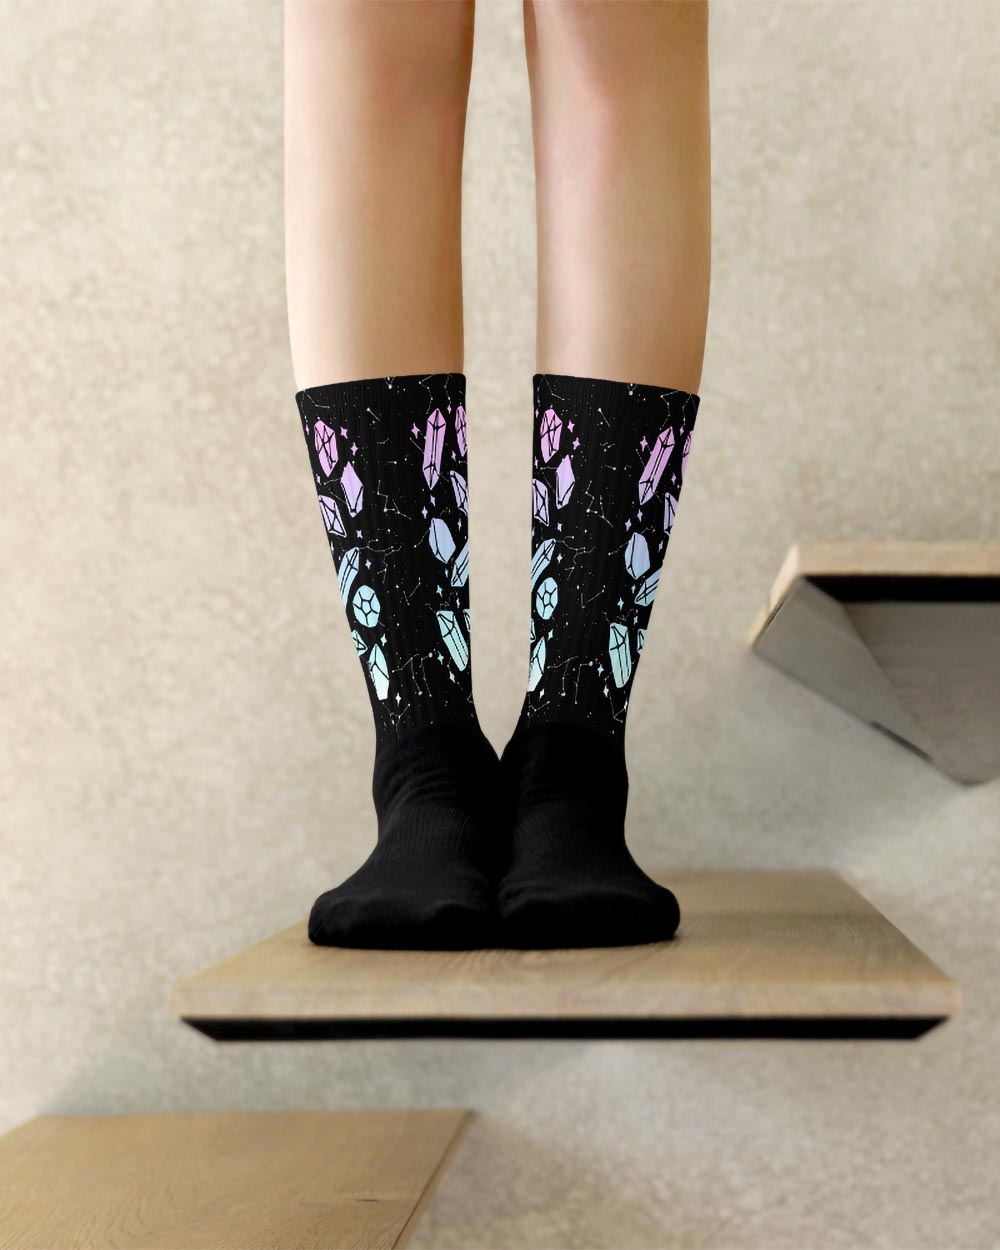 Divination Crystals Socks - Vegan Unisex Goth Witchy Socks Grunge Alt Accessories Cool Gothic Gifts for Him and Her